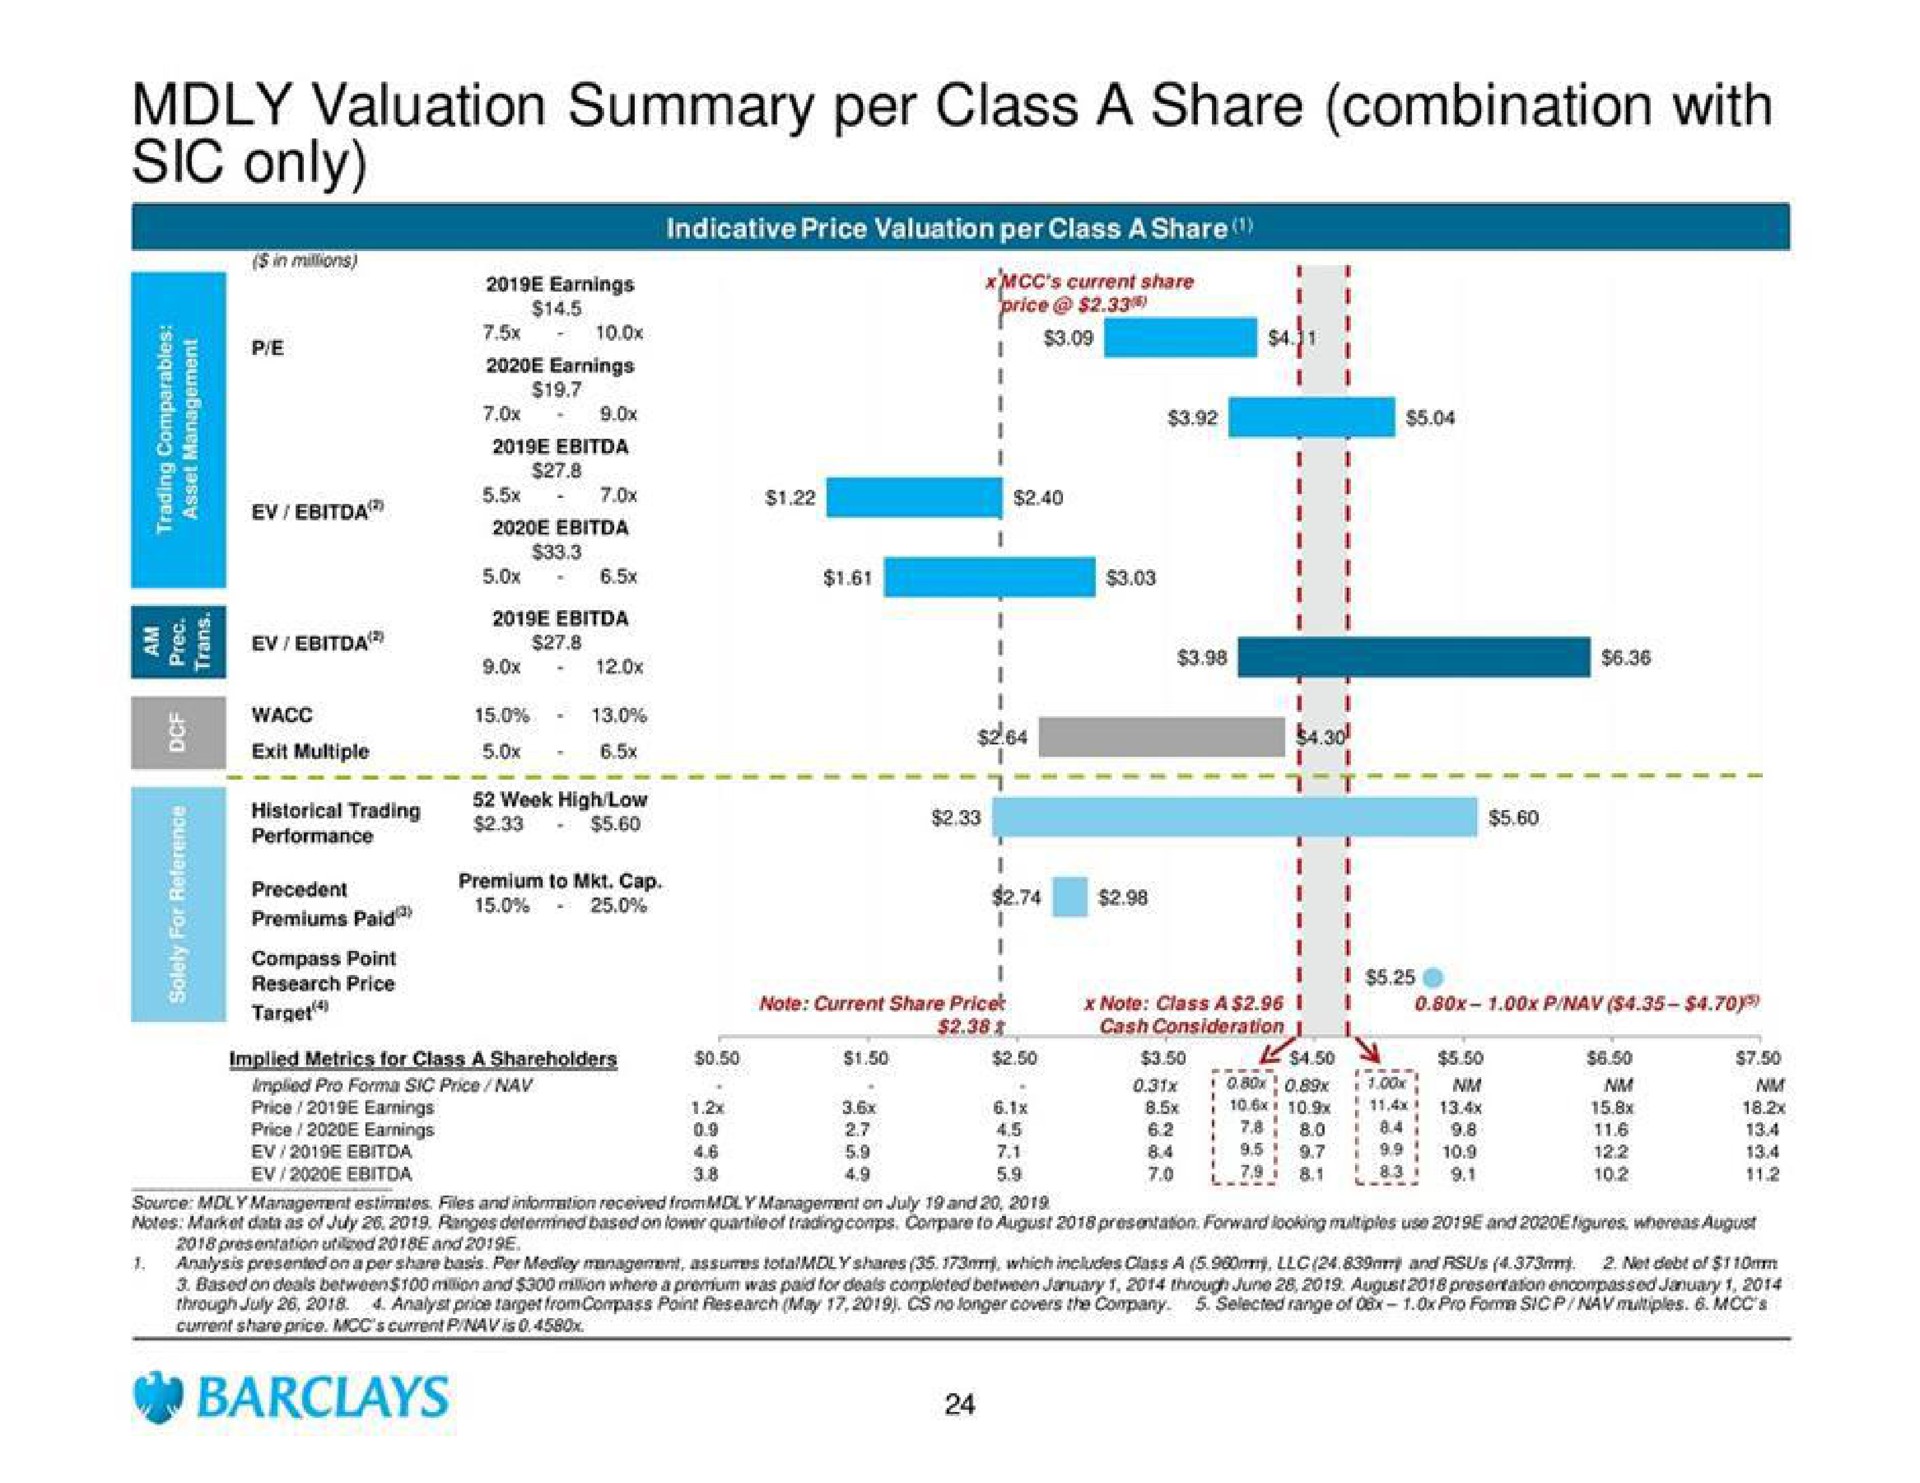 valuation summary per class a share combination with sic only soe | Barclays